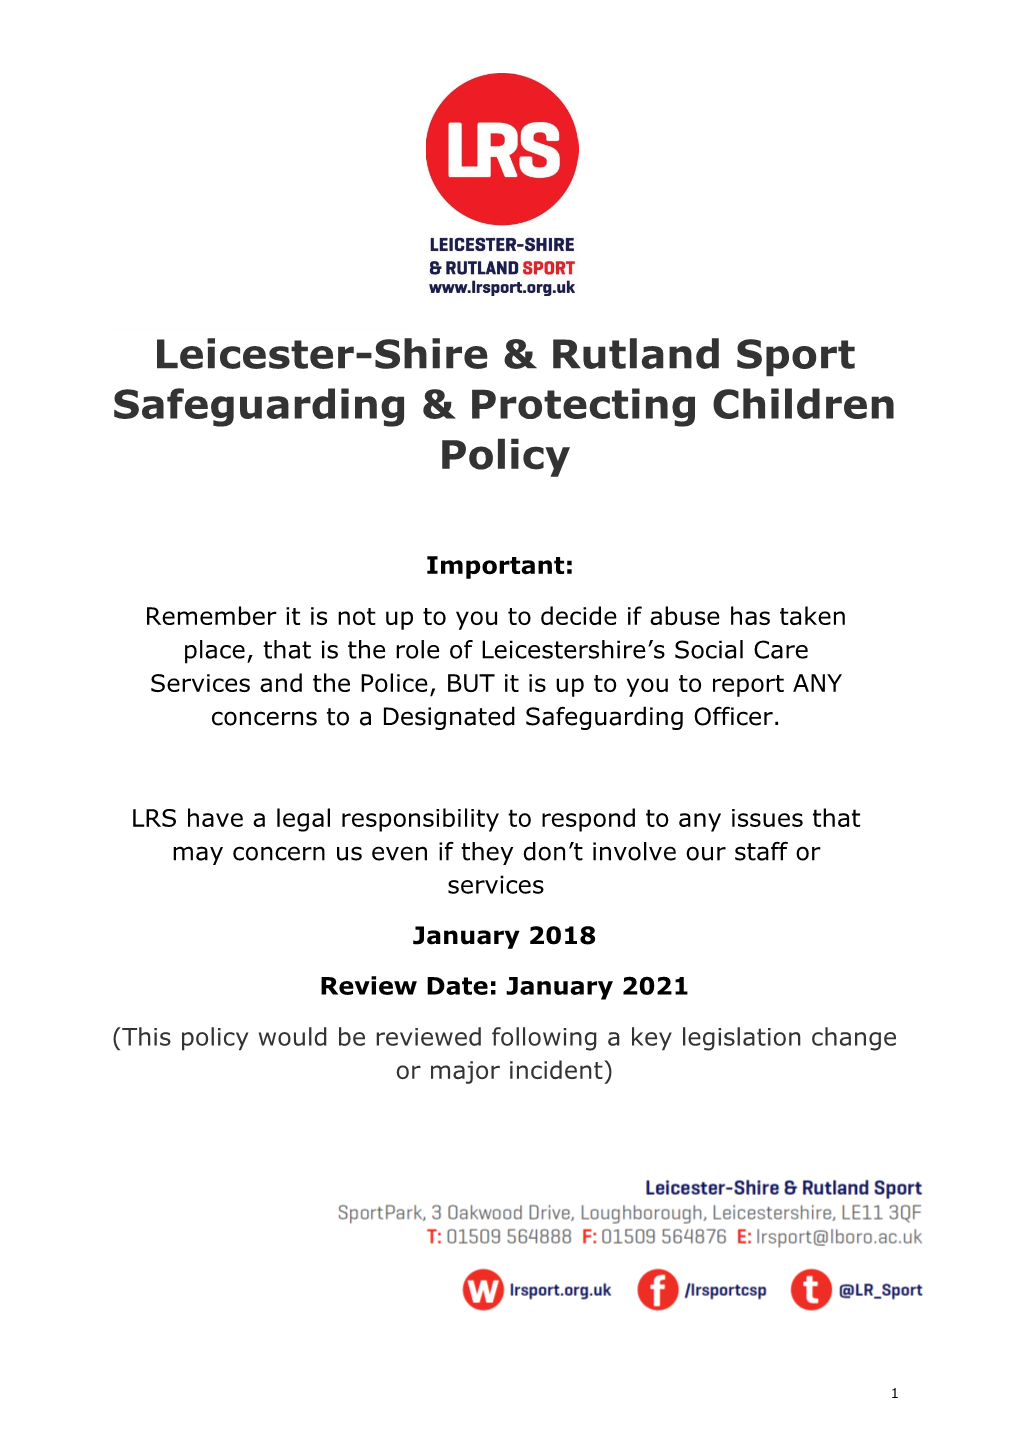 LRS Generic Safeguarding Policy